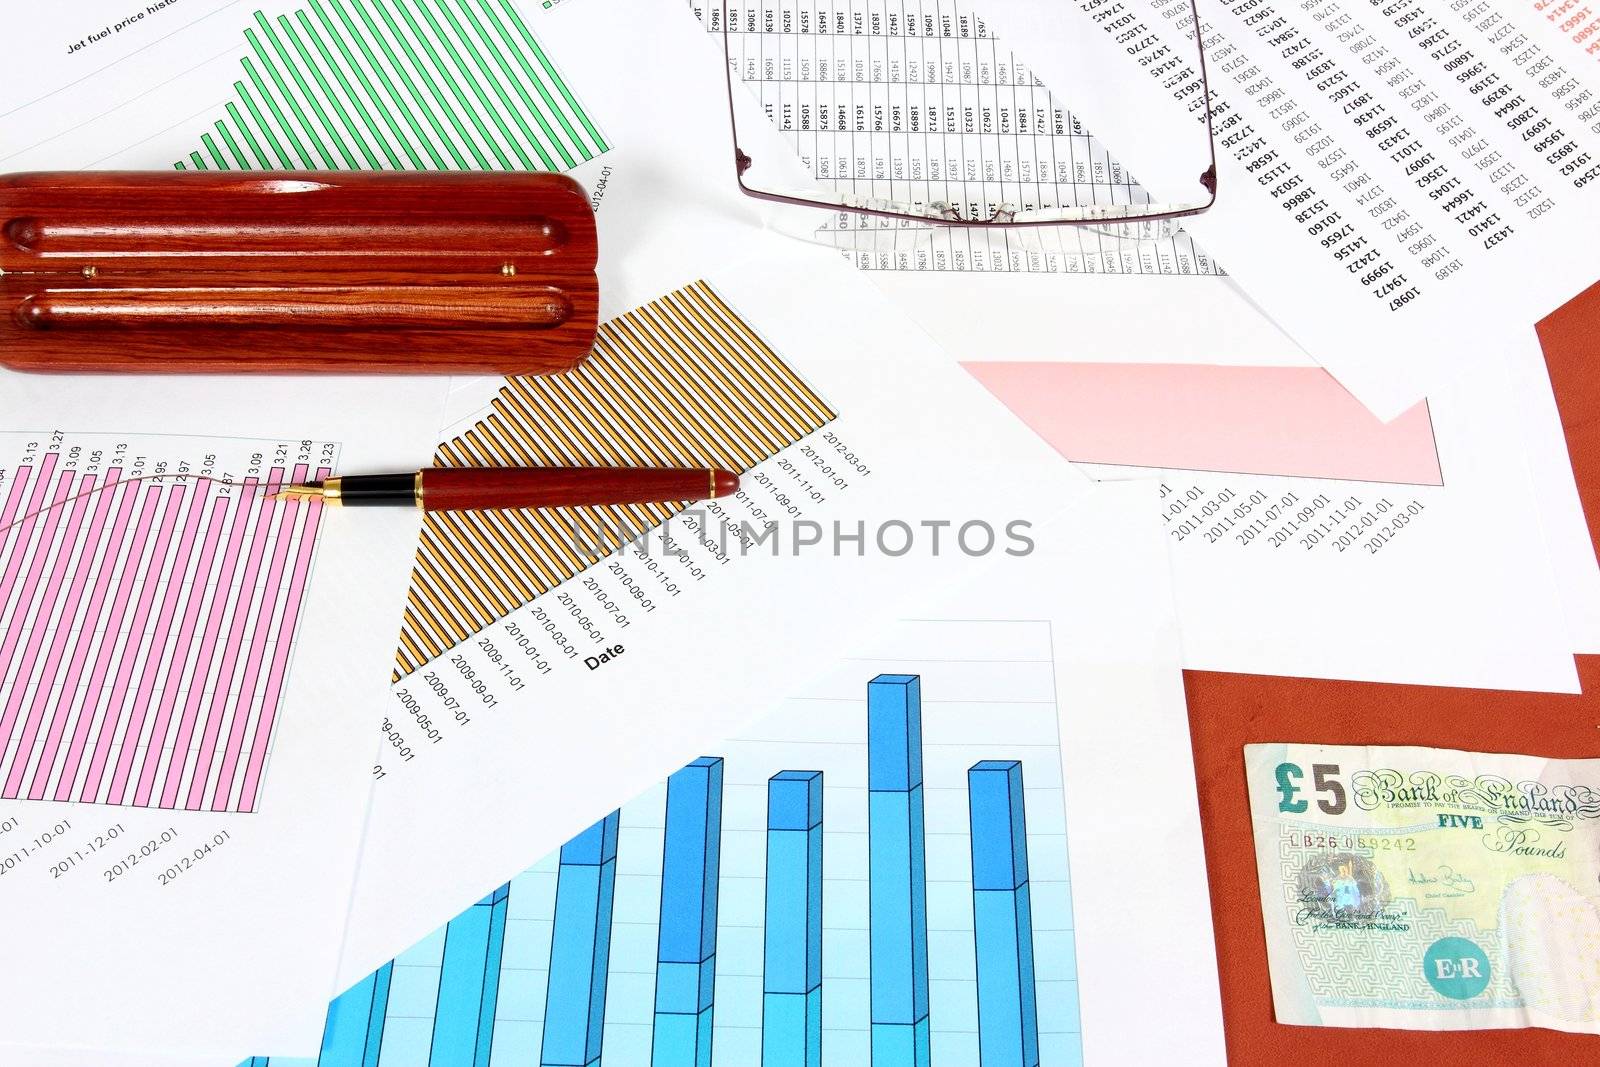 Business objects - fuel price charts, British pounds, ink pen and glasses. Financial concept.